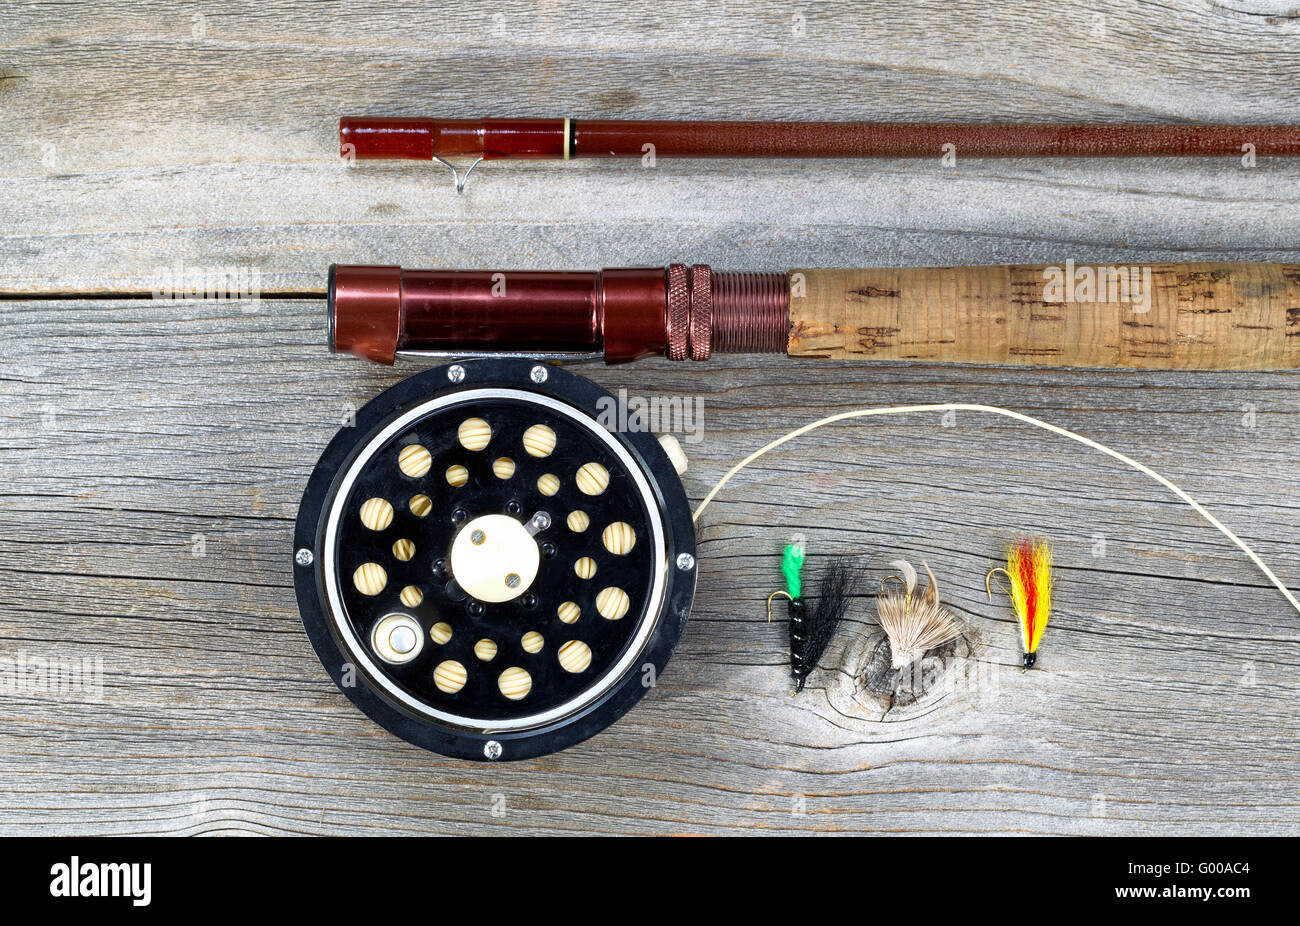 Old fly reel and rod on rustic wood Stock Photo